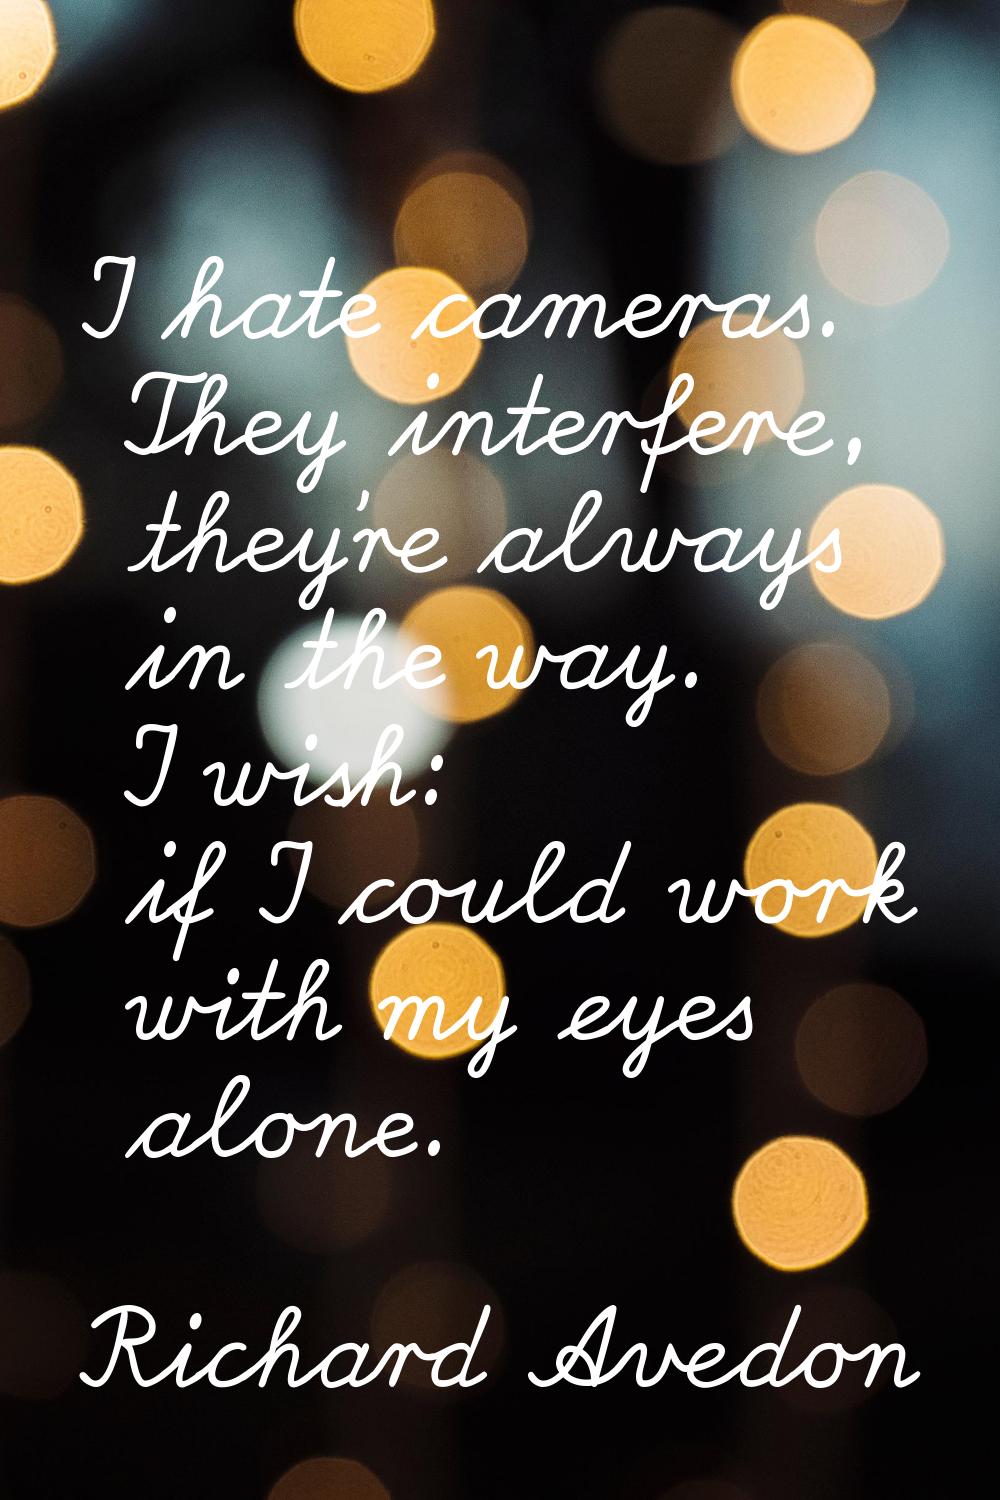 I hate cameras. They interfere, they're always in the way. I wish: if I could work with my eyes alo